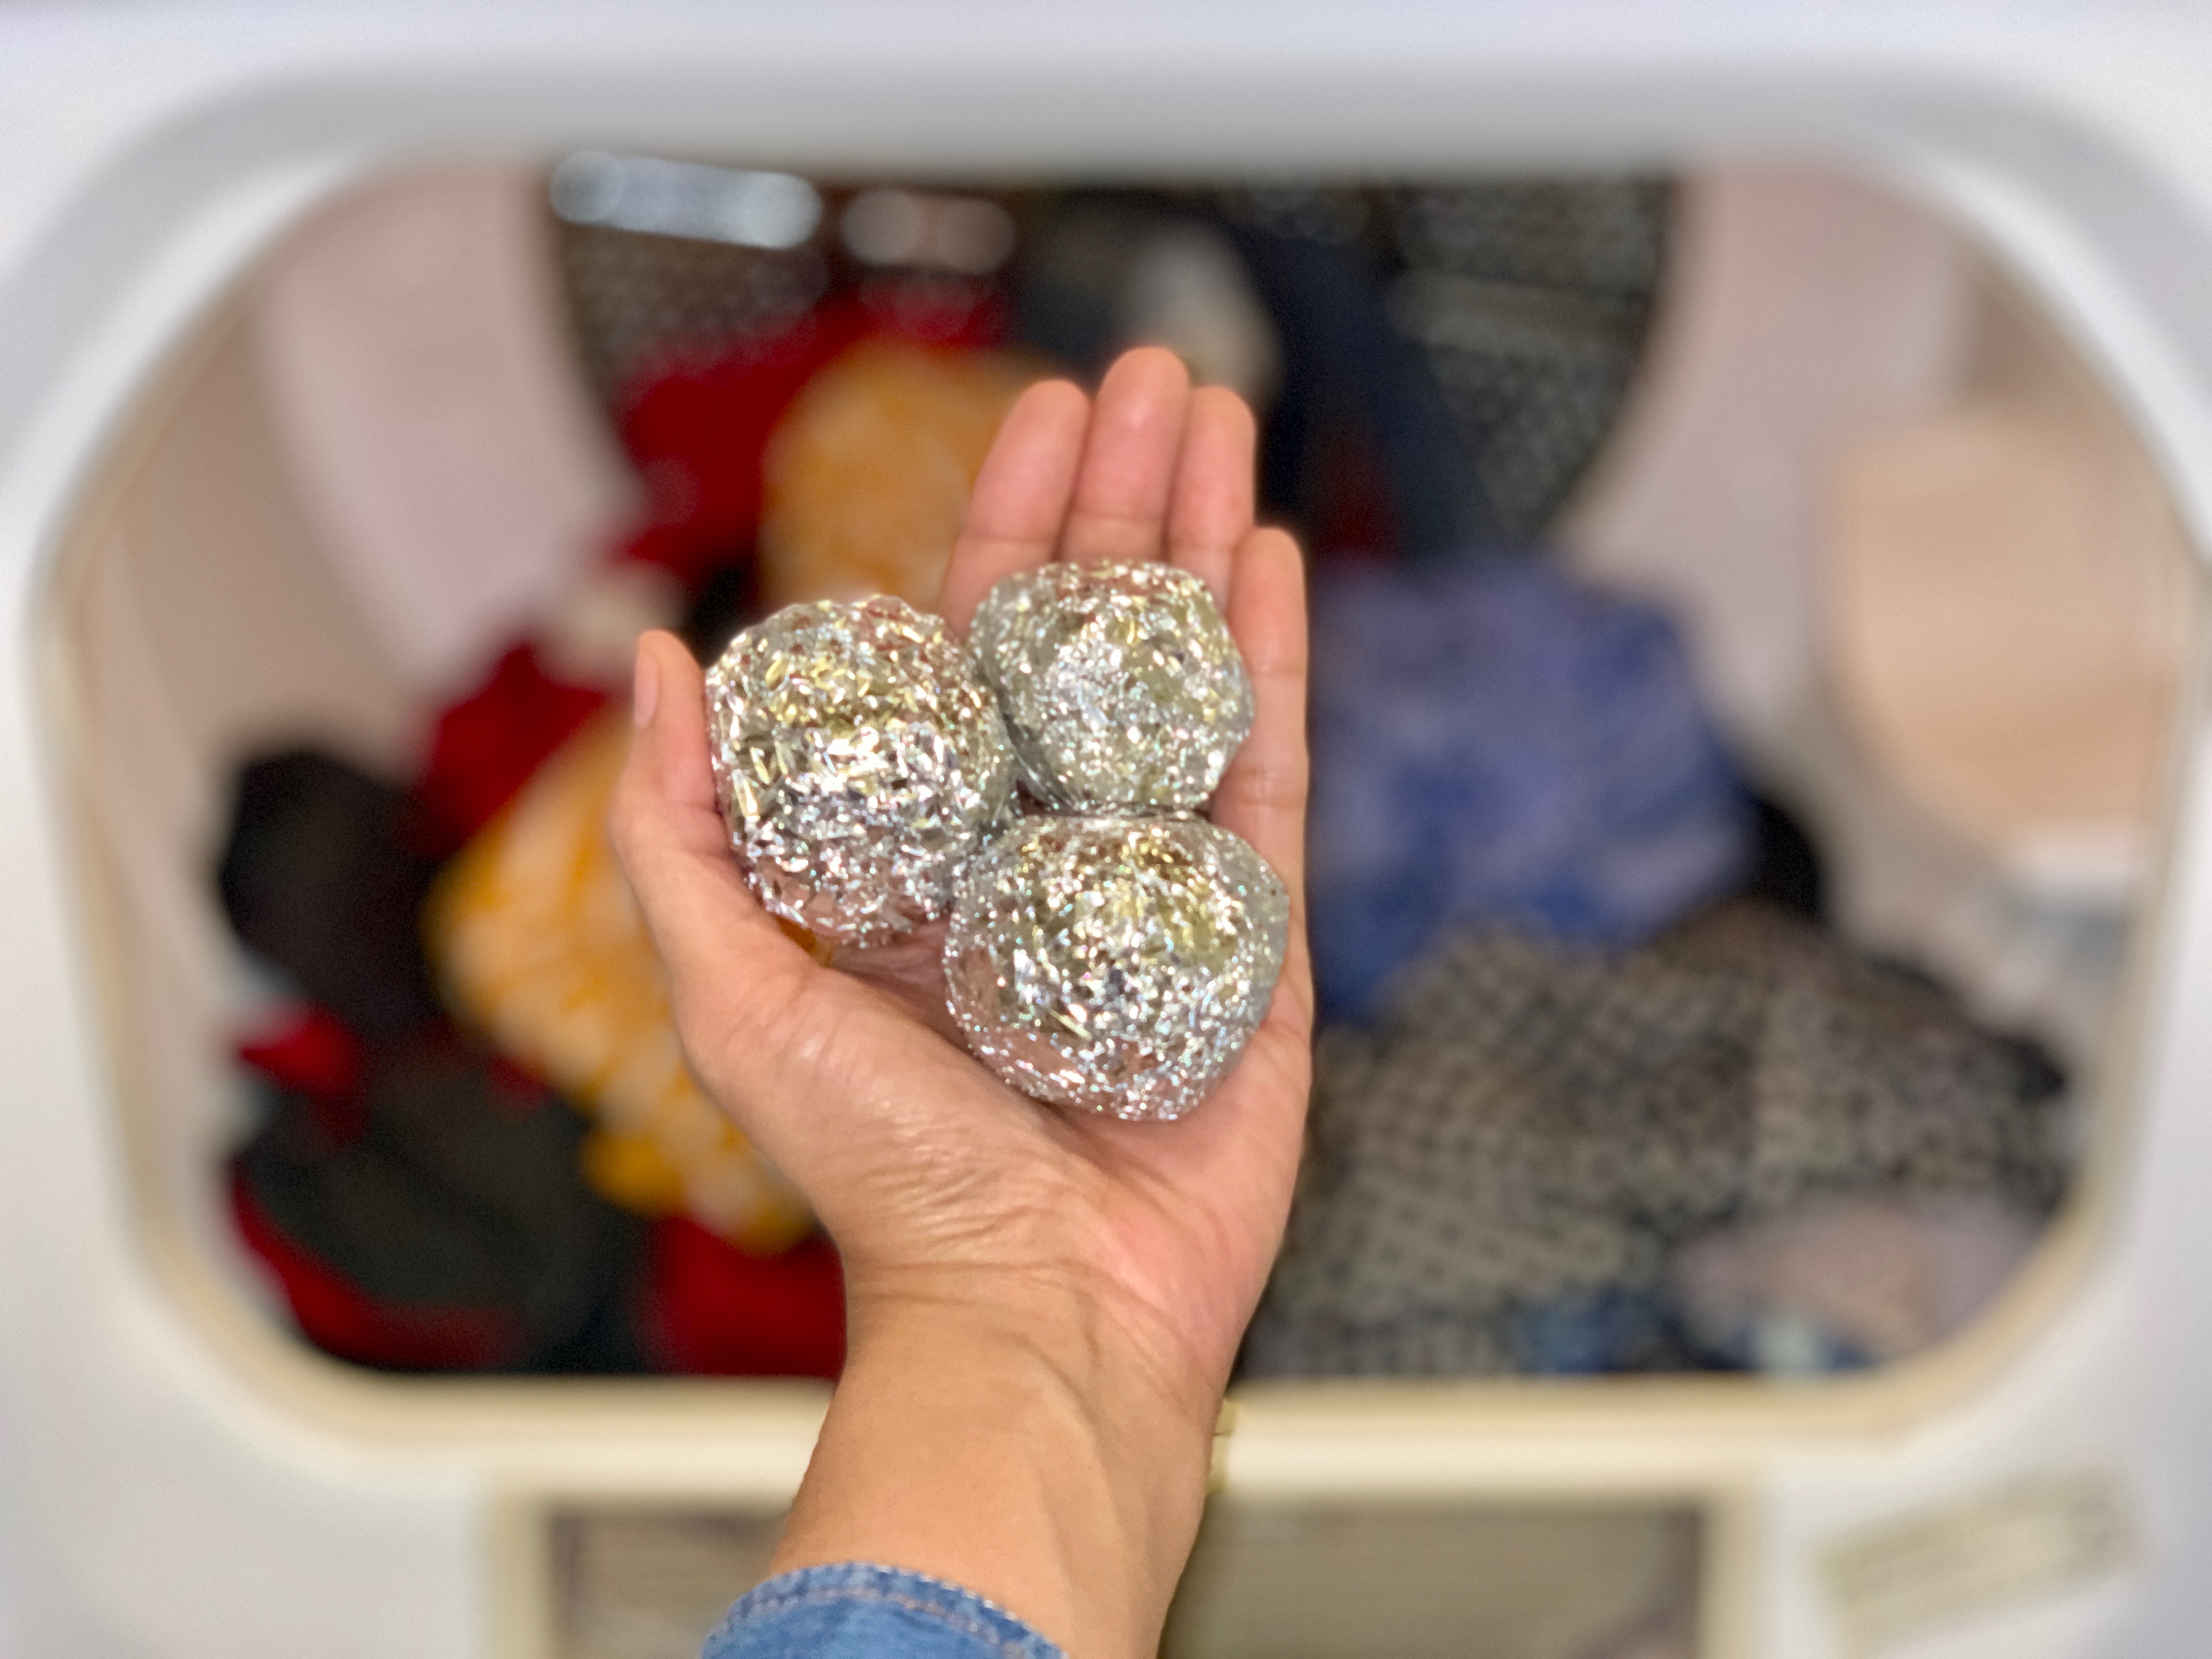 Use a ball of aluminum foil to eliminate static in the dryer - CNET